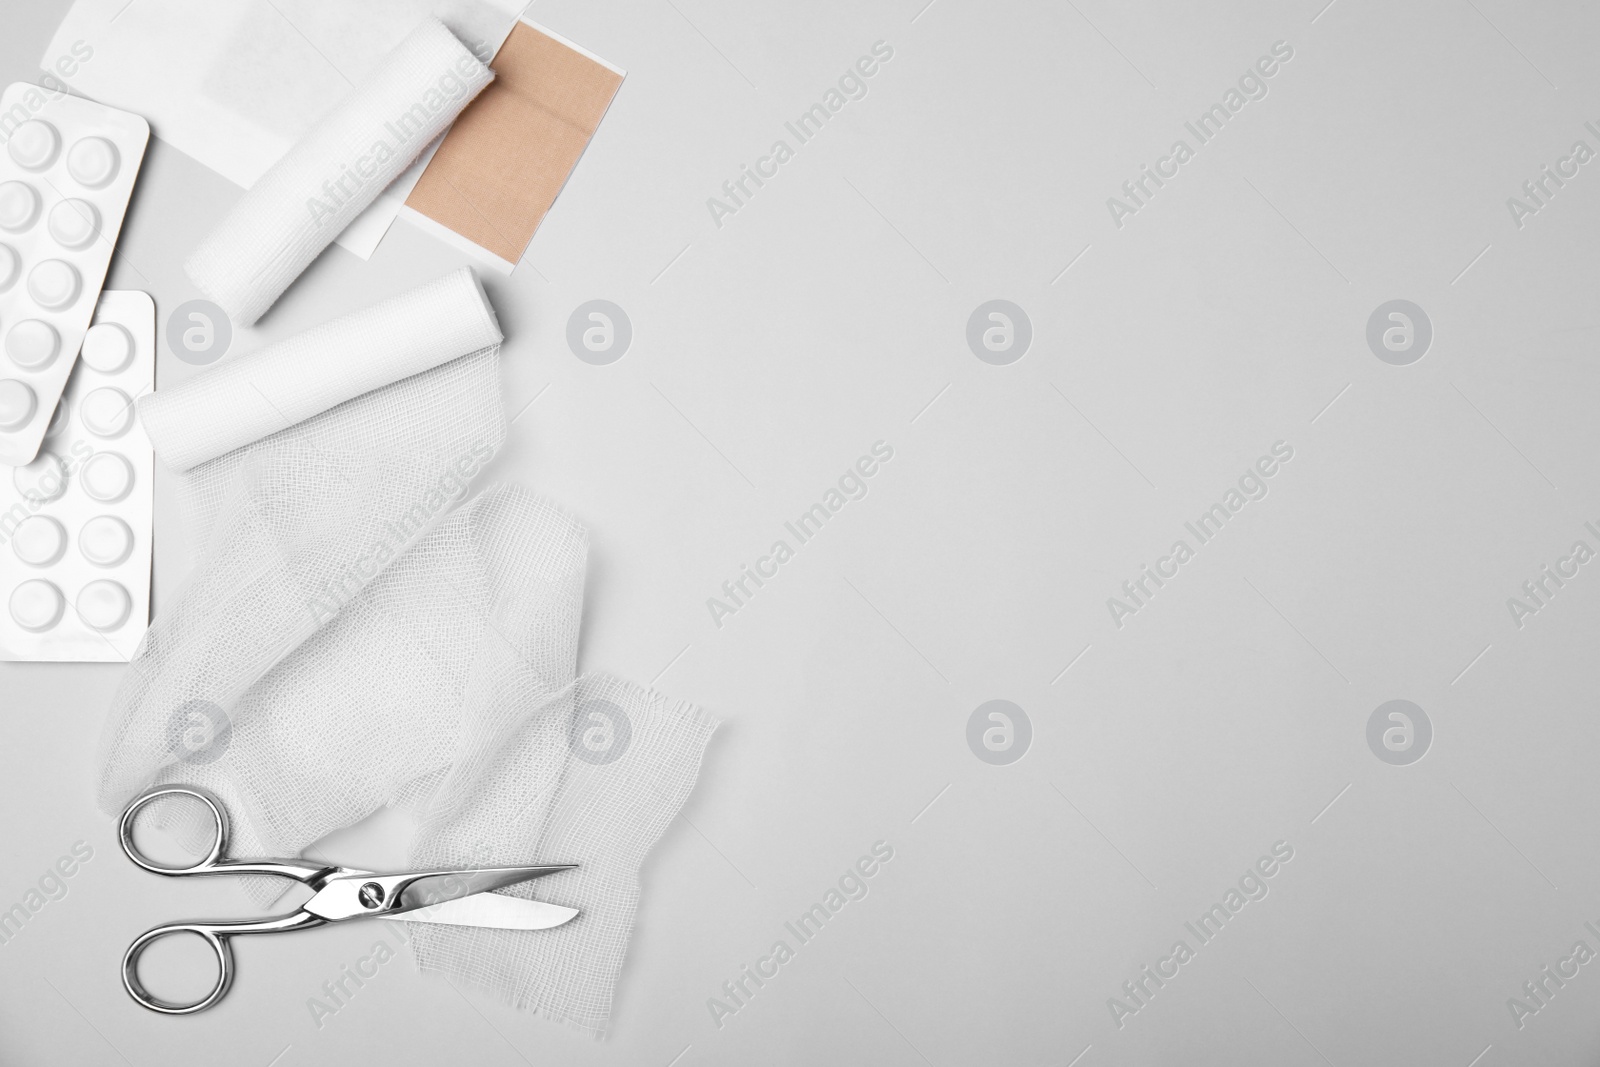 Photo of Bandage rolls and medical supplies on white background, flat lay. Space for text